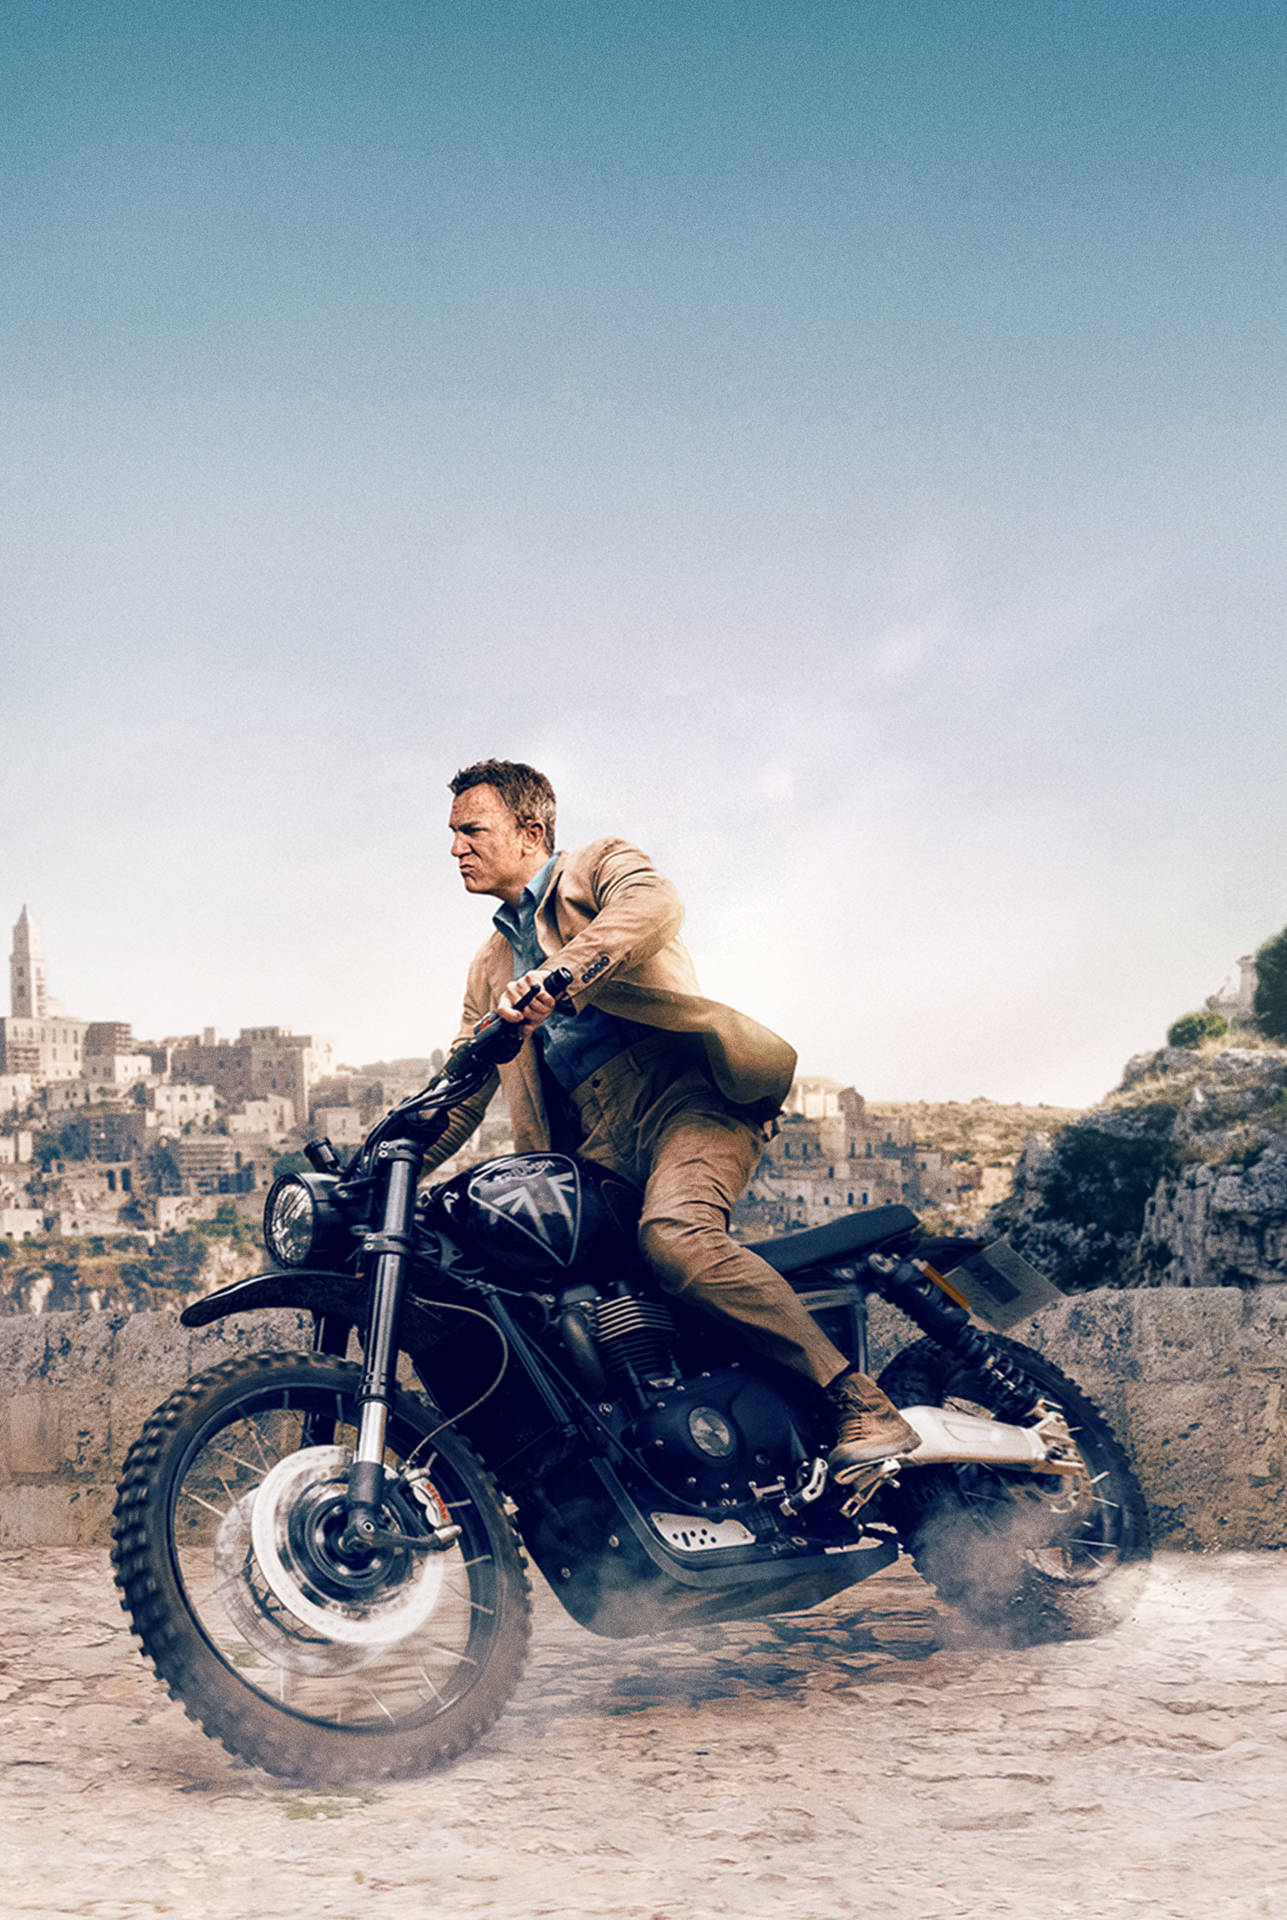 No Time To Die James Bond Riding Motorcycle Wallpaper